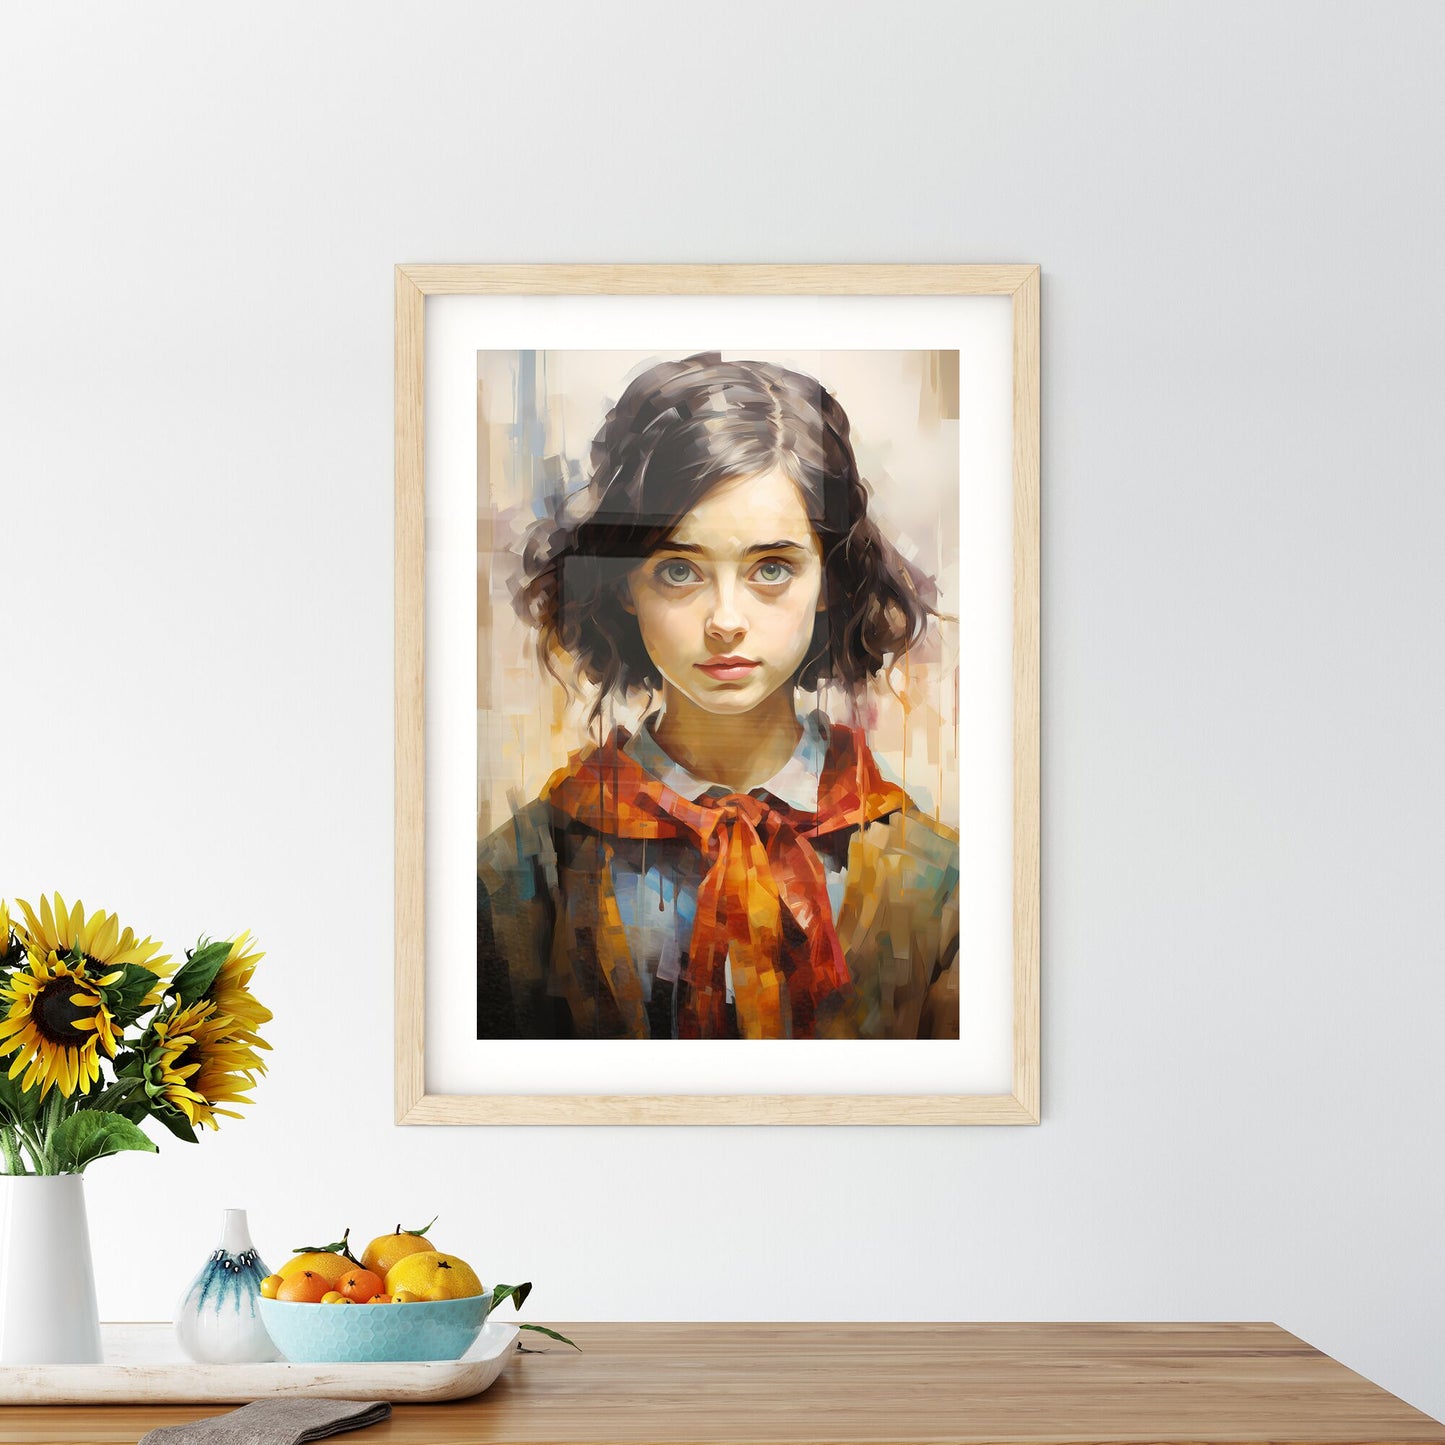 Anne Frank German-Born Jewish Diarist - A Painting Of A Girl Default Title